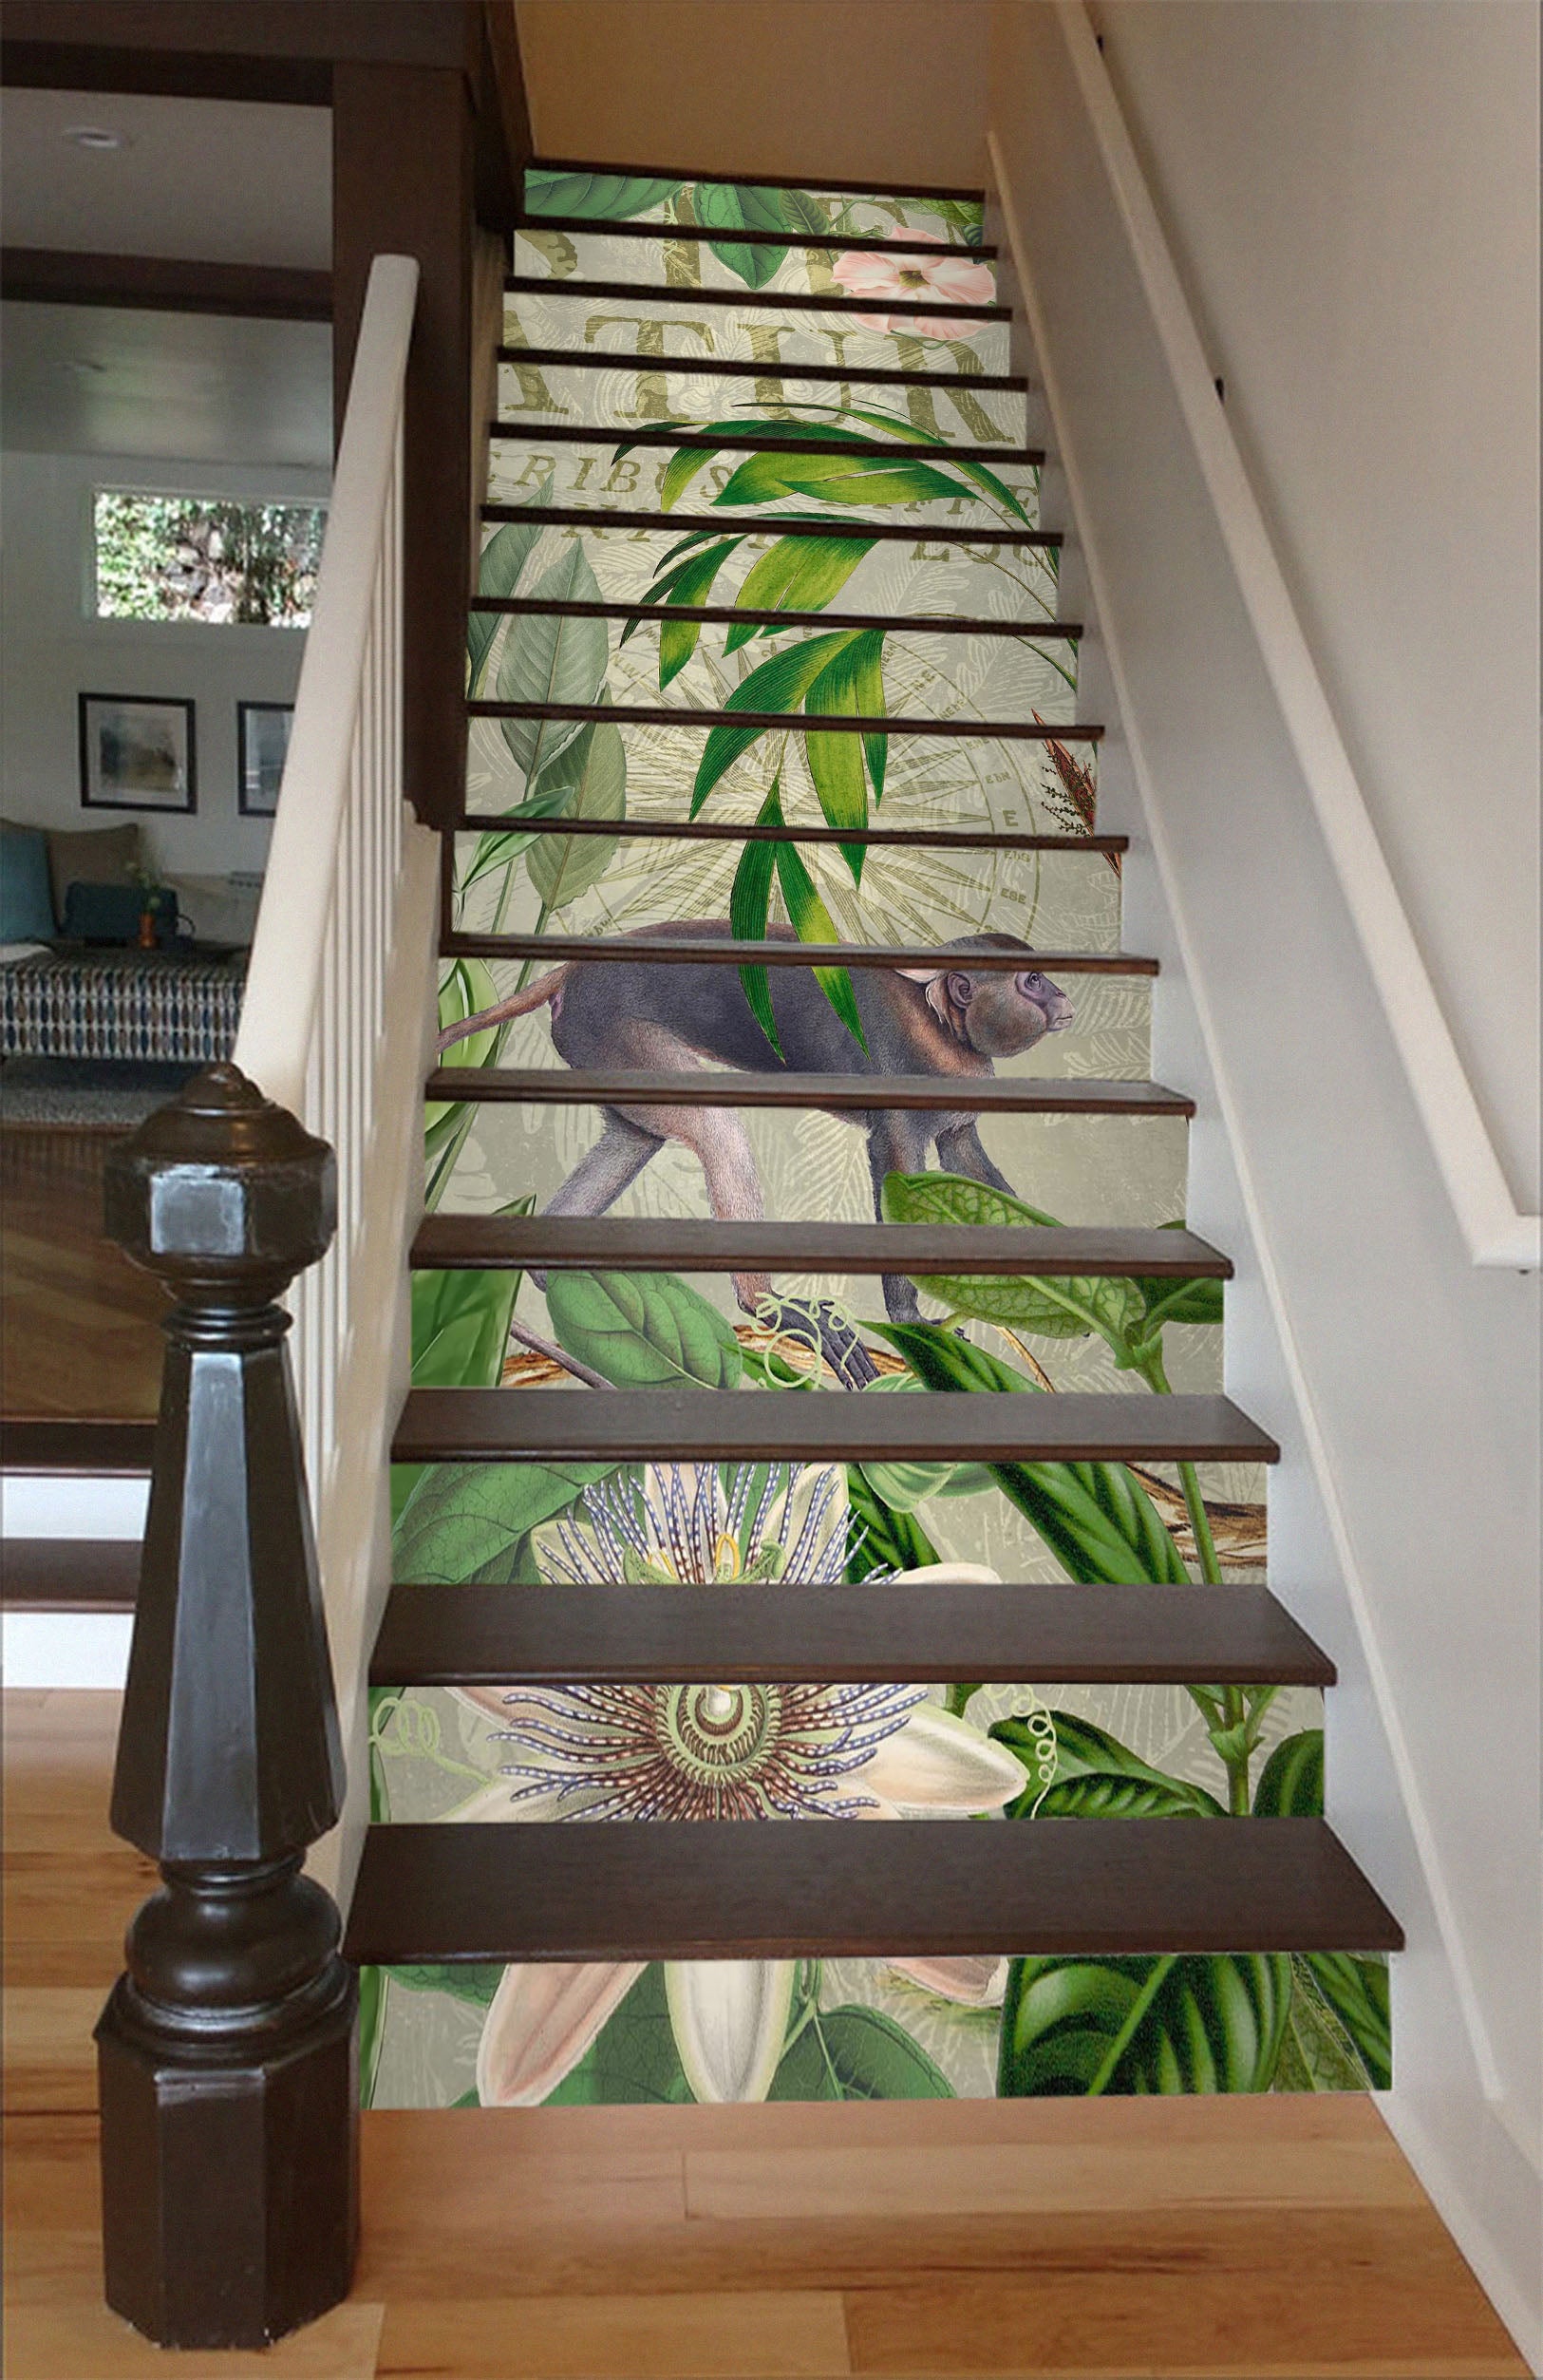 3D Leaves Monkey 11037 Andrea Haase Stair Risers